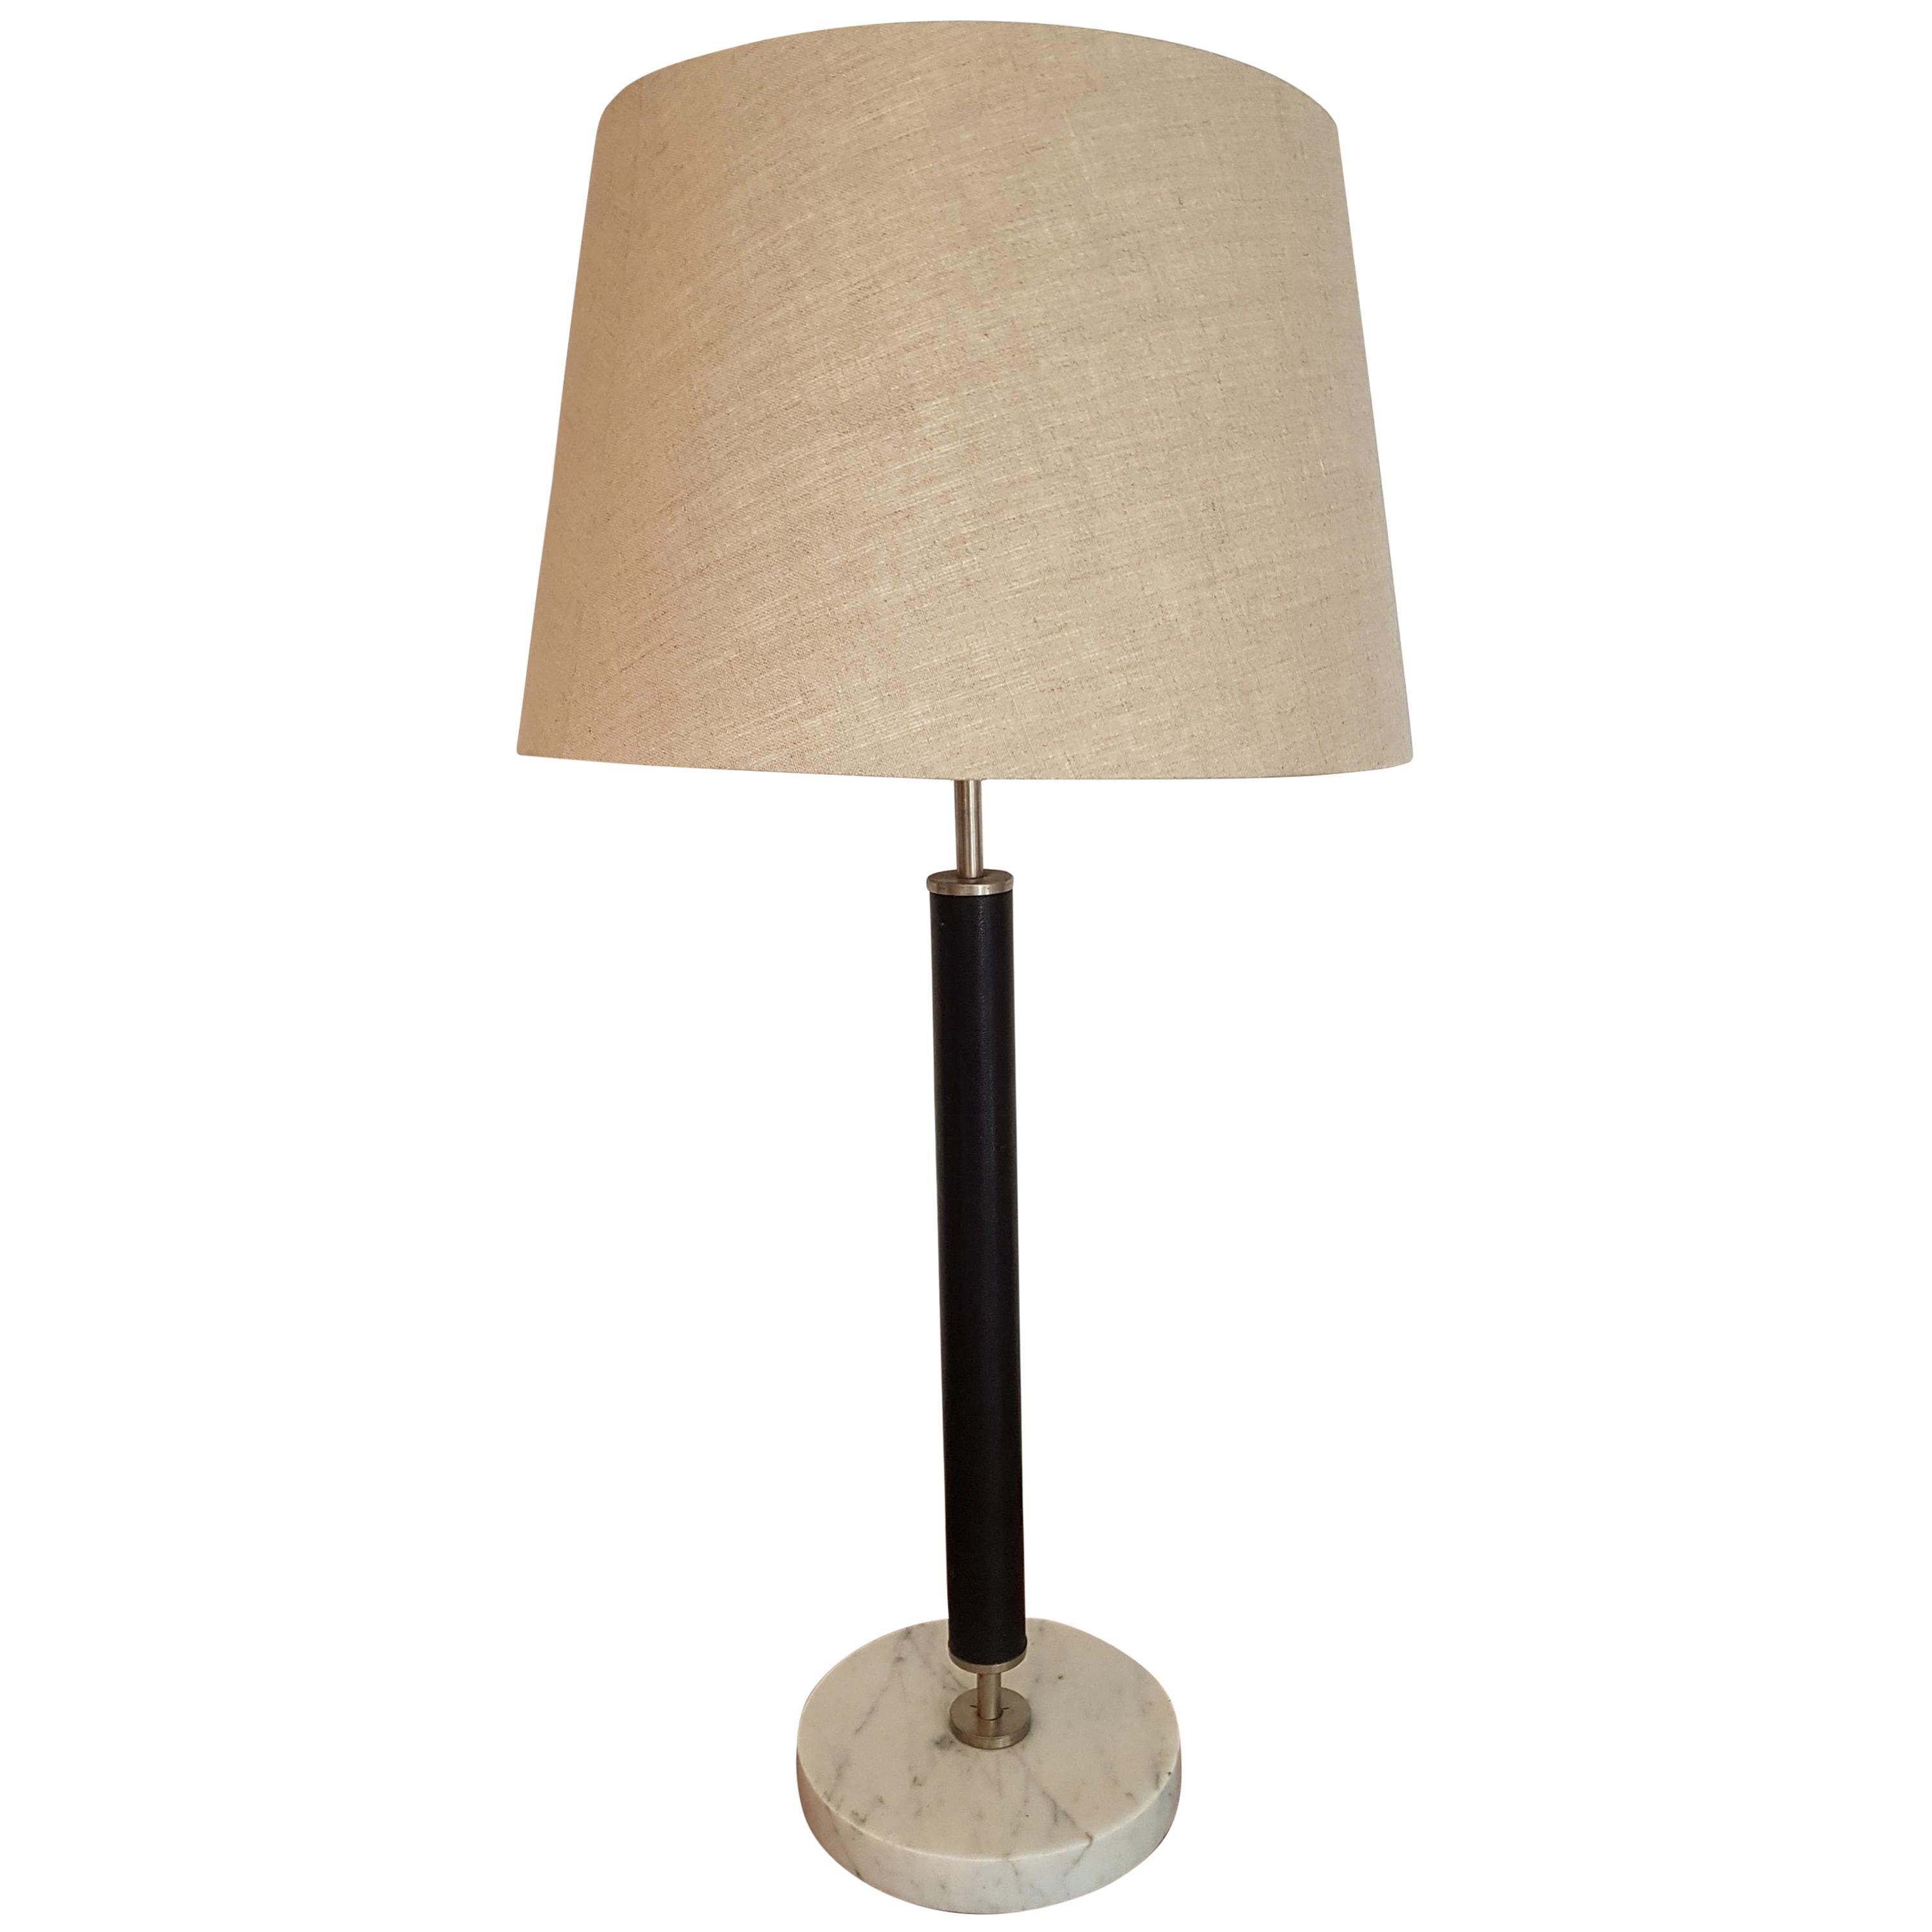 Mid-Century Modern Table Lamp with Thick Marble Base and Leather Stem